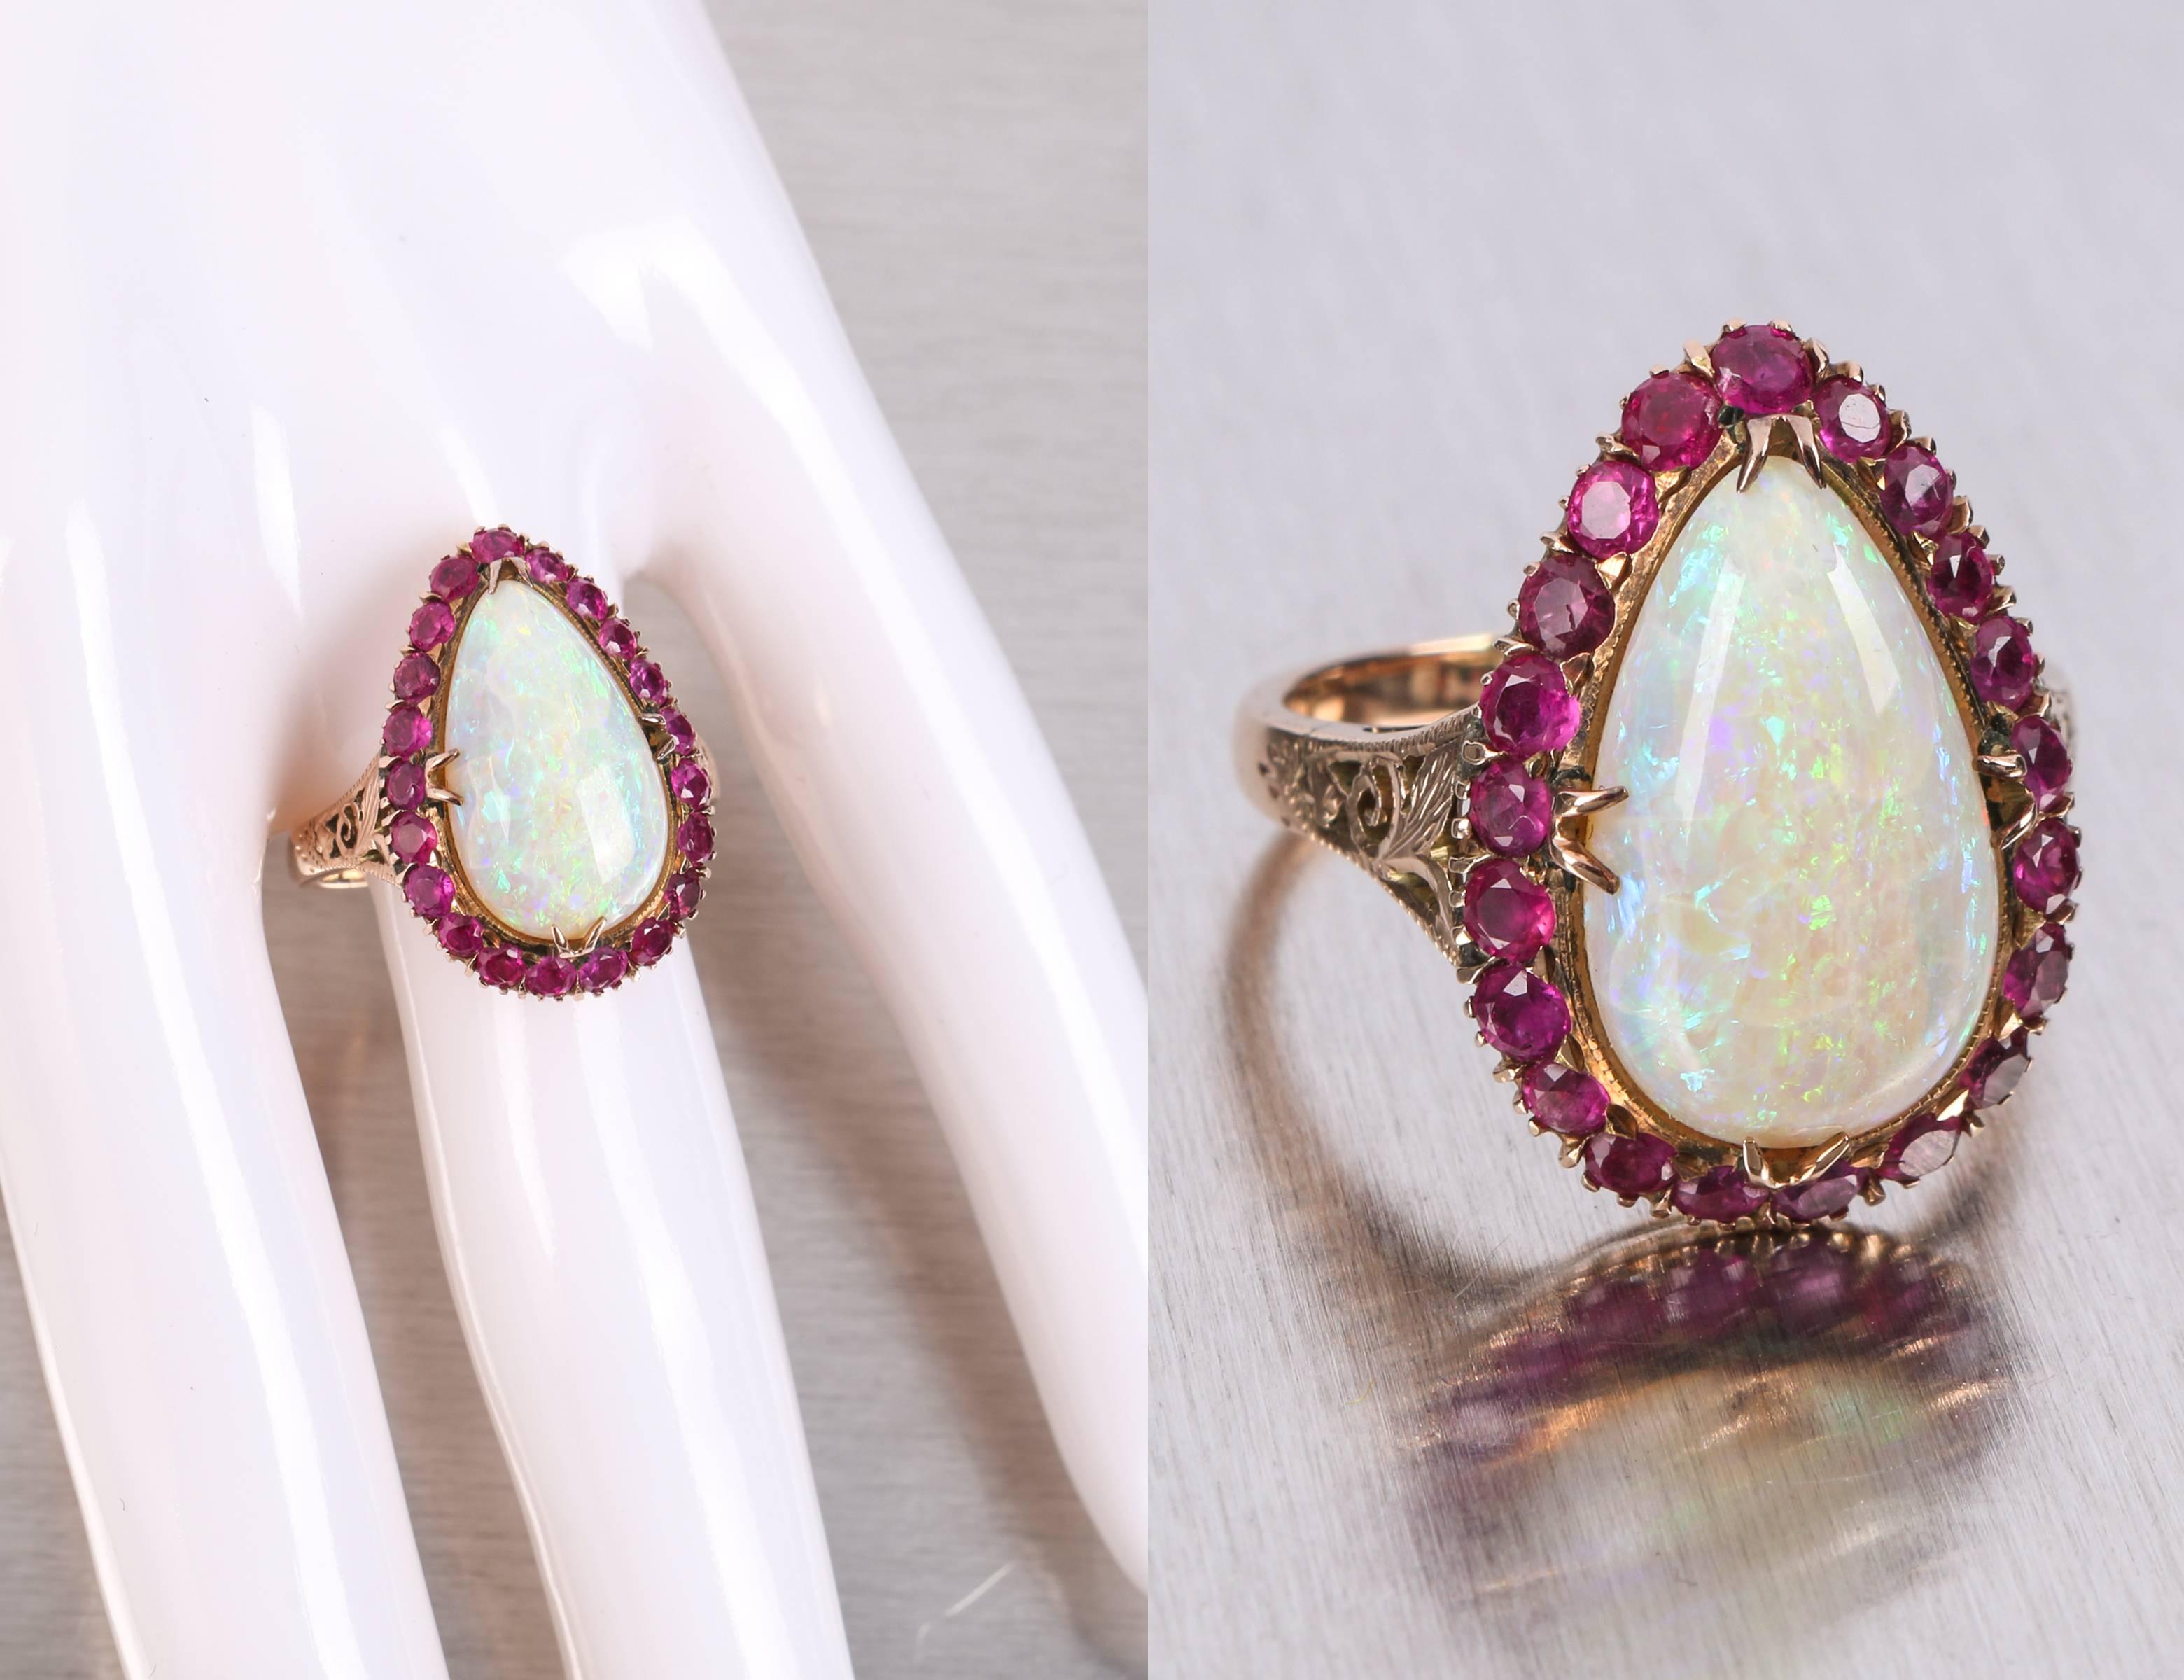 Vintage c.1930-1940's rose gold 14 kt large teardrop opal ruby ring. High polish rose gold mounting has open scroll work on either side of pronged setting. Main stone is a large cabochon cut, prong set, teardrop opal. Opal has reds, blue and green